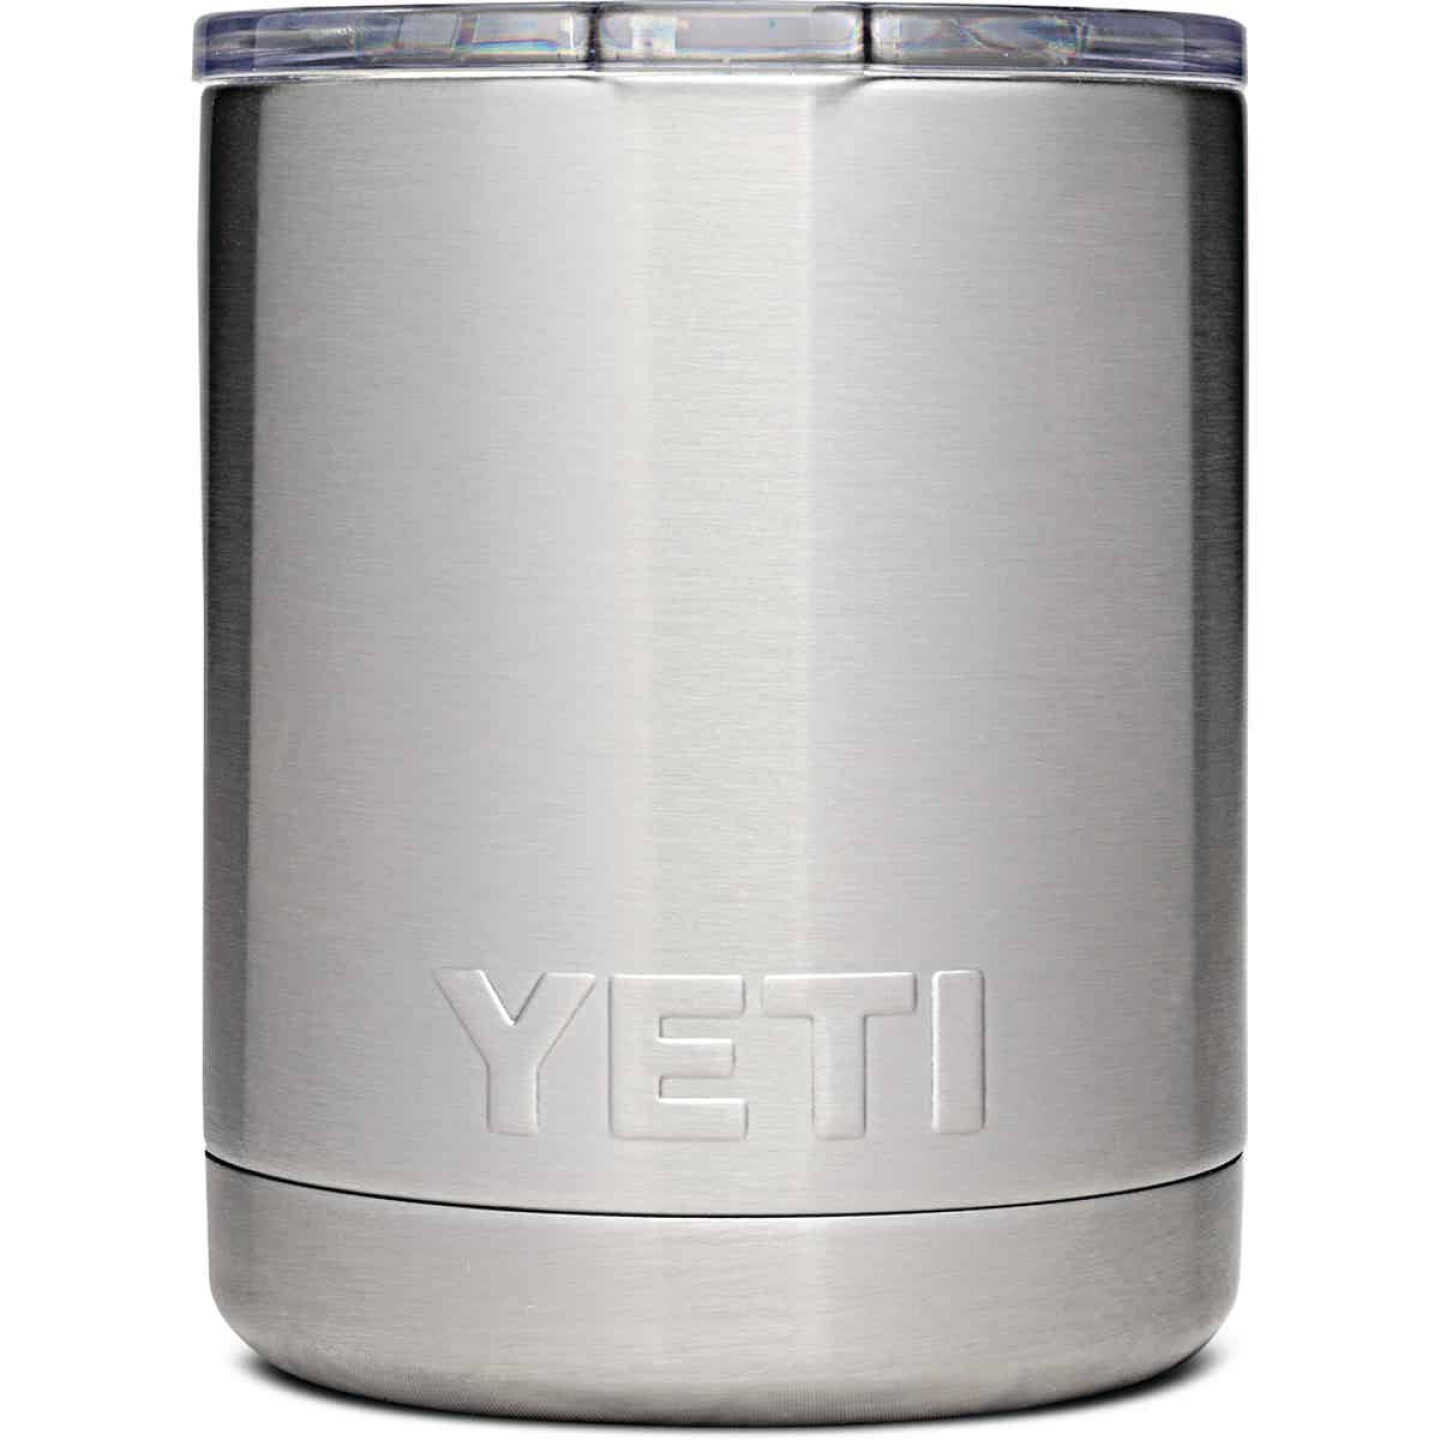 Yeti Rambler Lowball 10 Oz. Silver Stainless Steel Insulated Tumbler -  Dazey's Supply